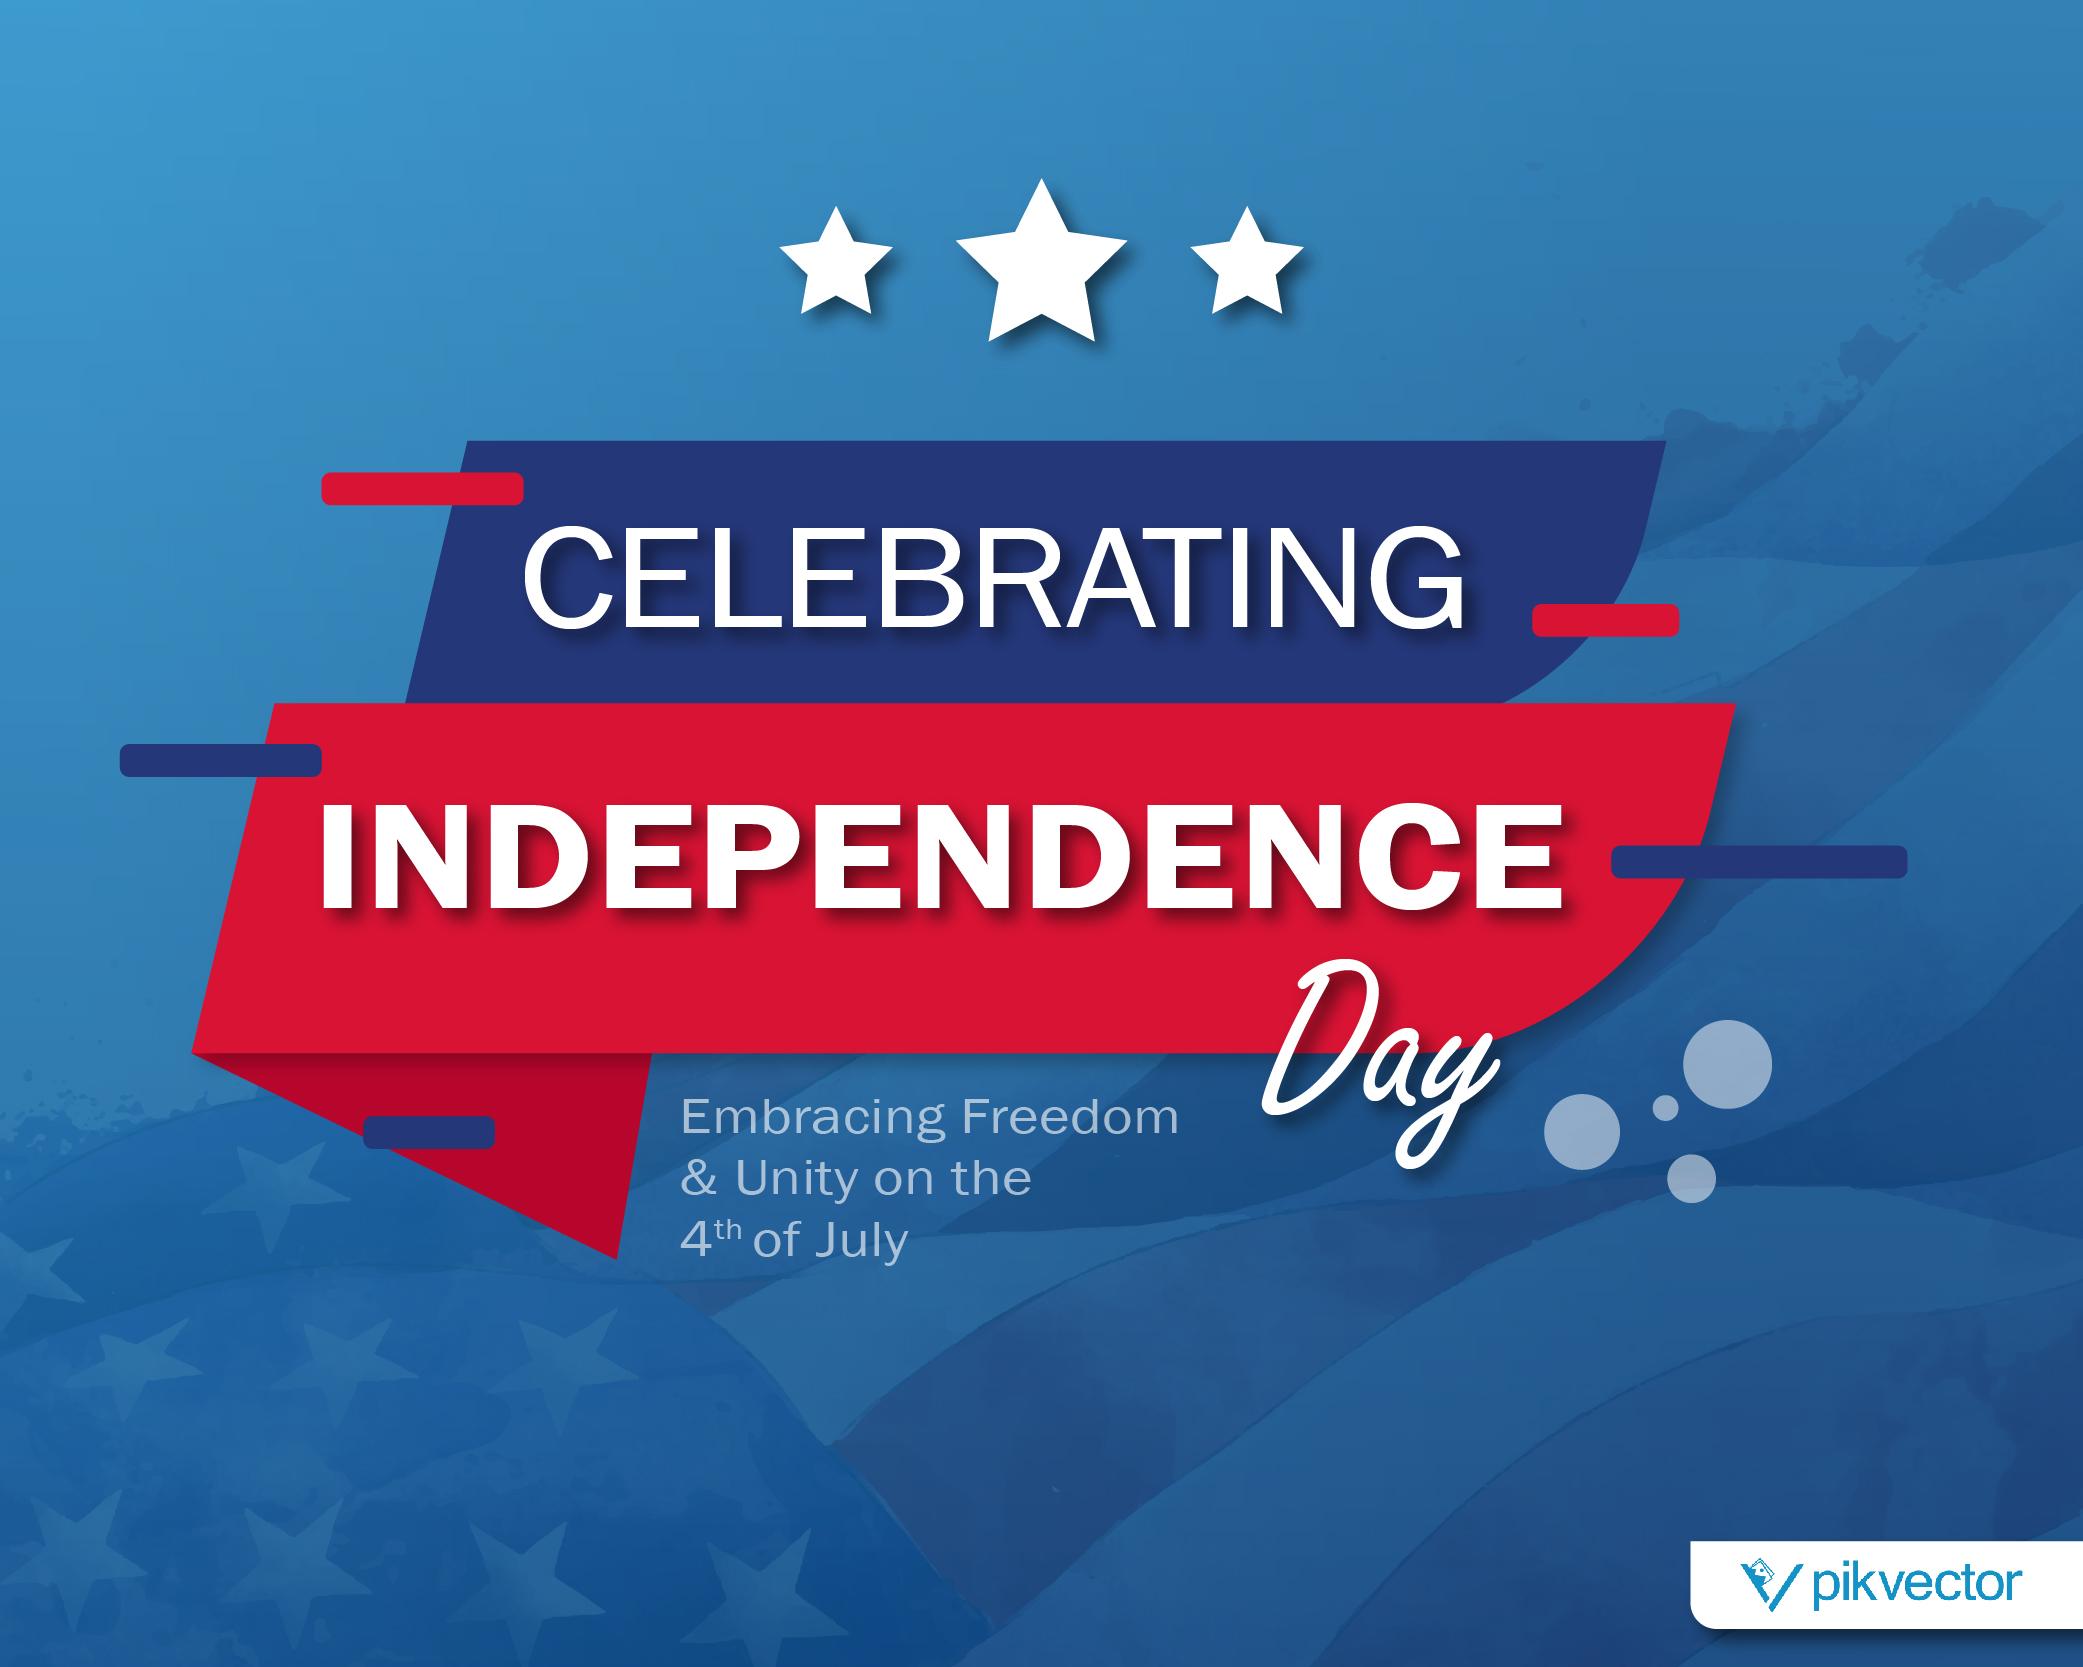 Celebrating Independence Day: Embracing Freedom and Unity on the Fourth of July